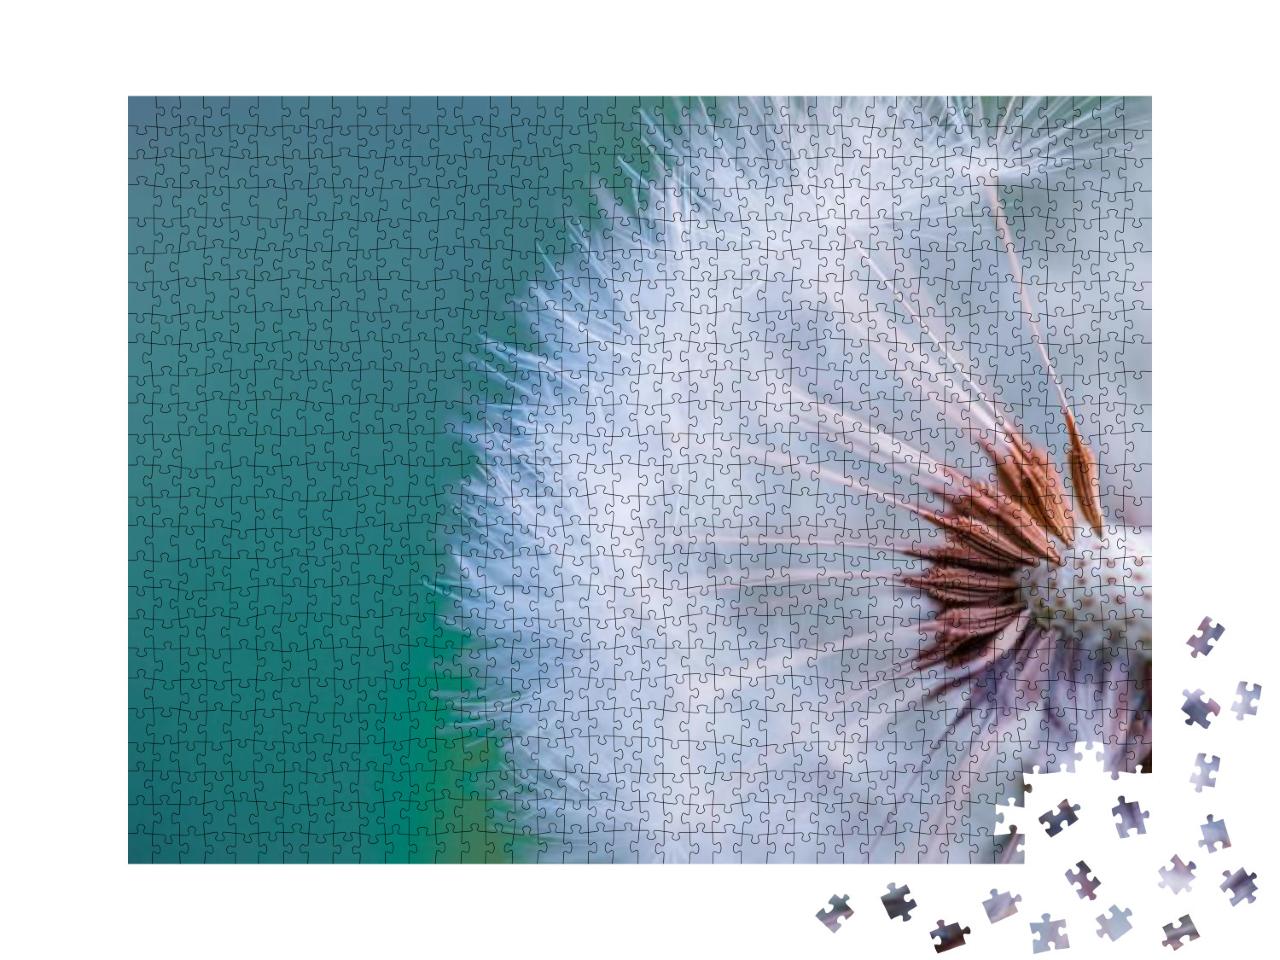 Closeup of Dandelion with Blurred Background, Artistic Na... Jigsaw Puzzle with 1000 pieces